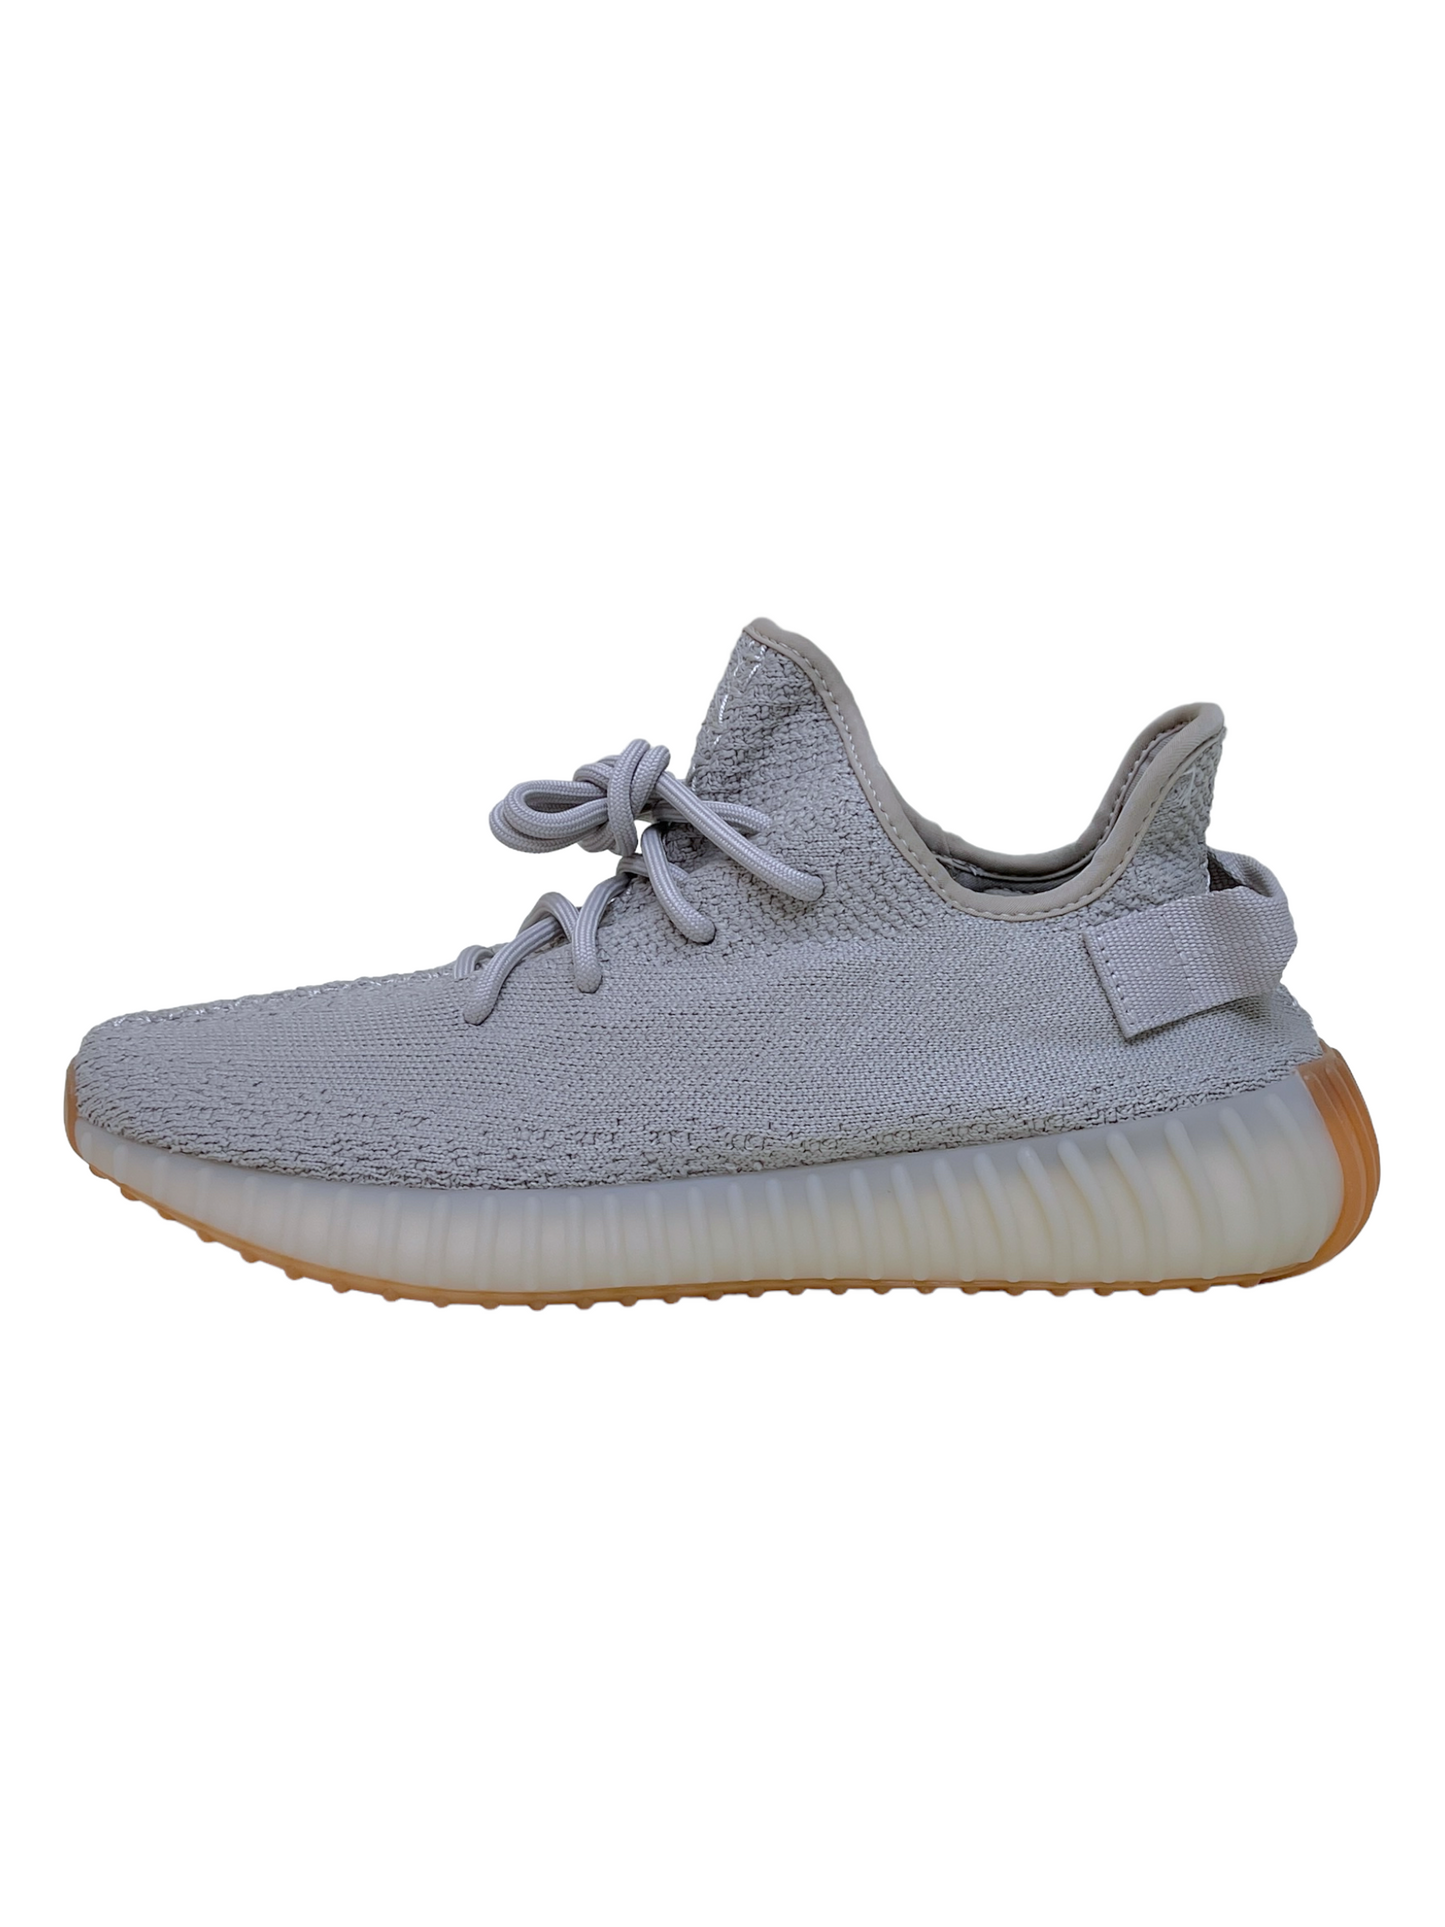 Adidas Yeezy 350 Sesame Sneakers - Genuine Design Luxury Consignment for Men. New & Pre-Owned Clothing, Shoes, & Accessories. Calgary, Canada